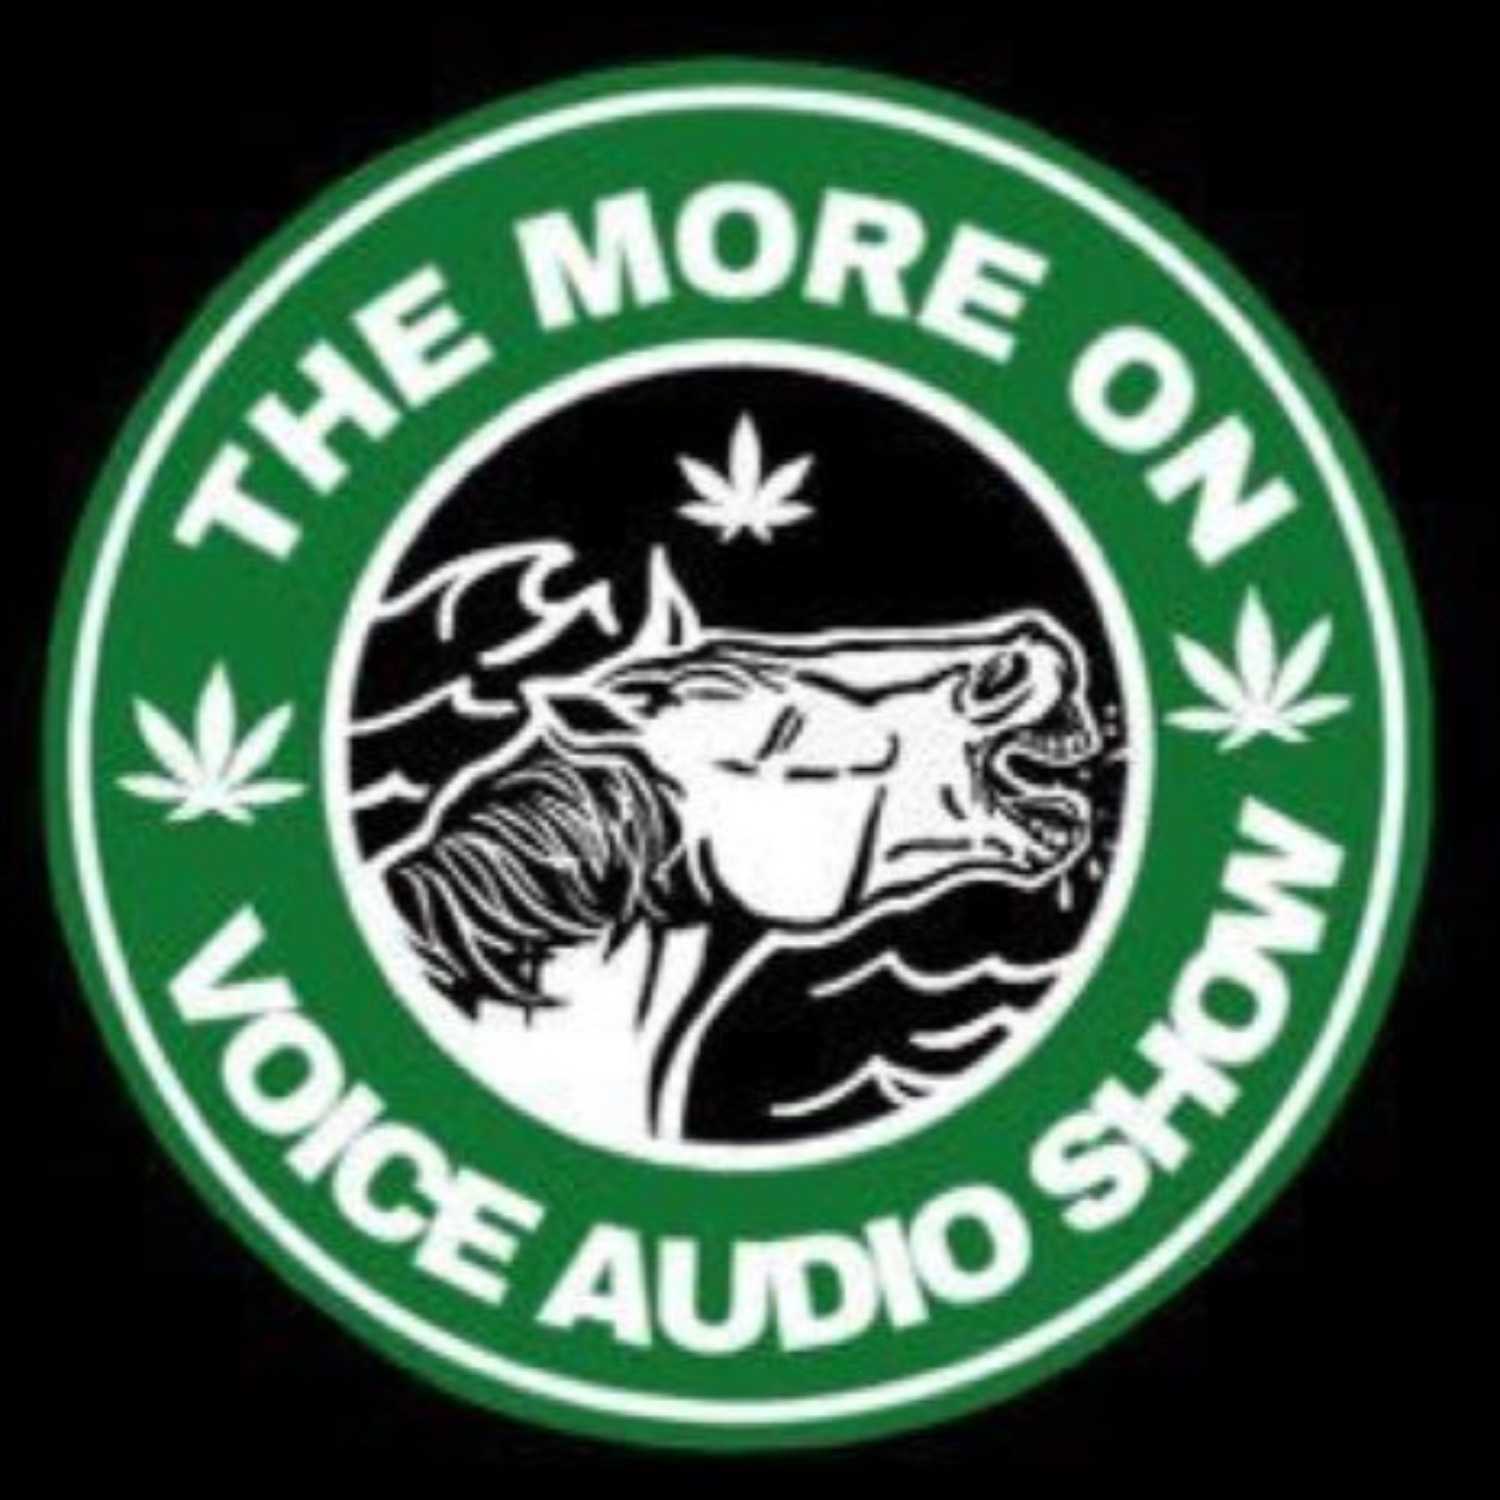 The More On Voice Audio Show: Episode 54